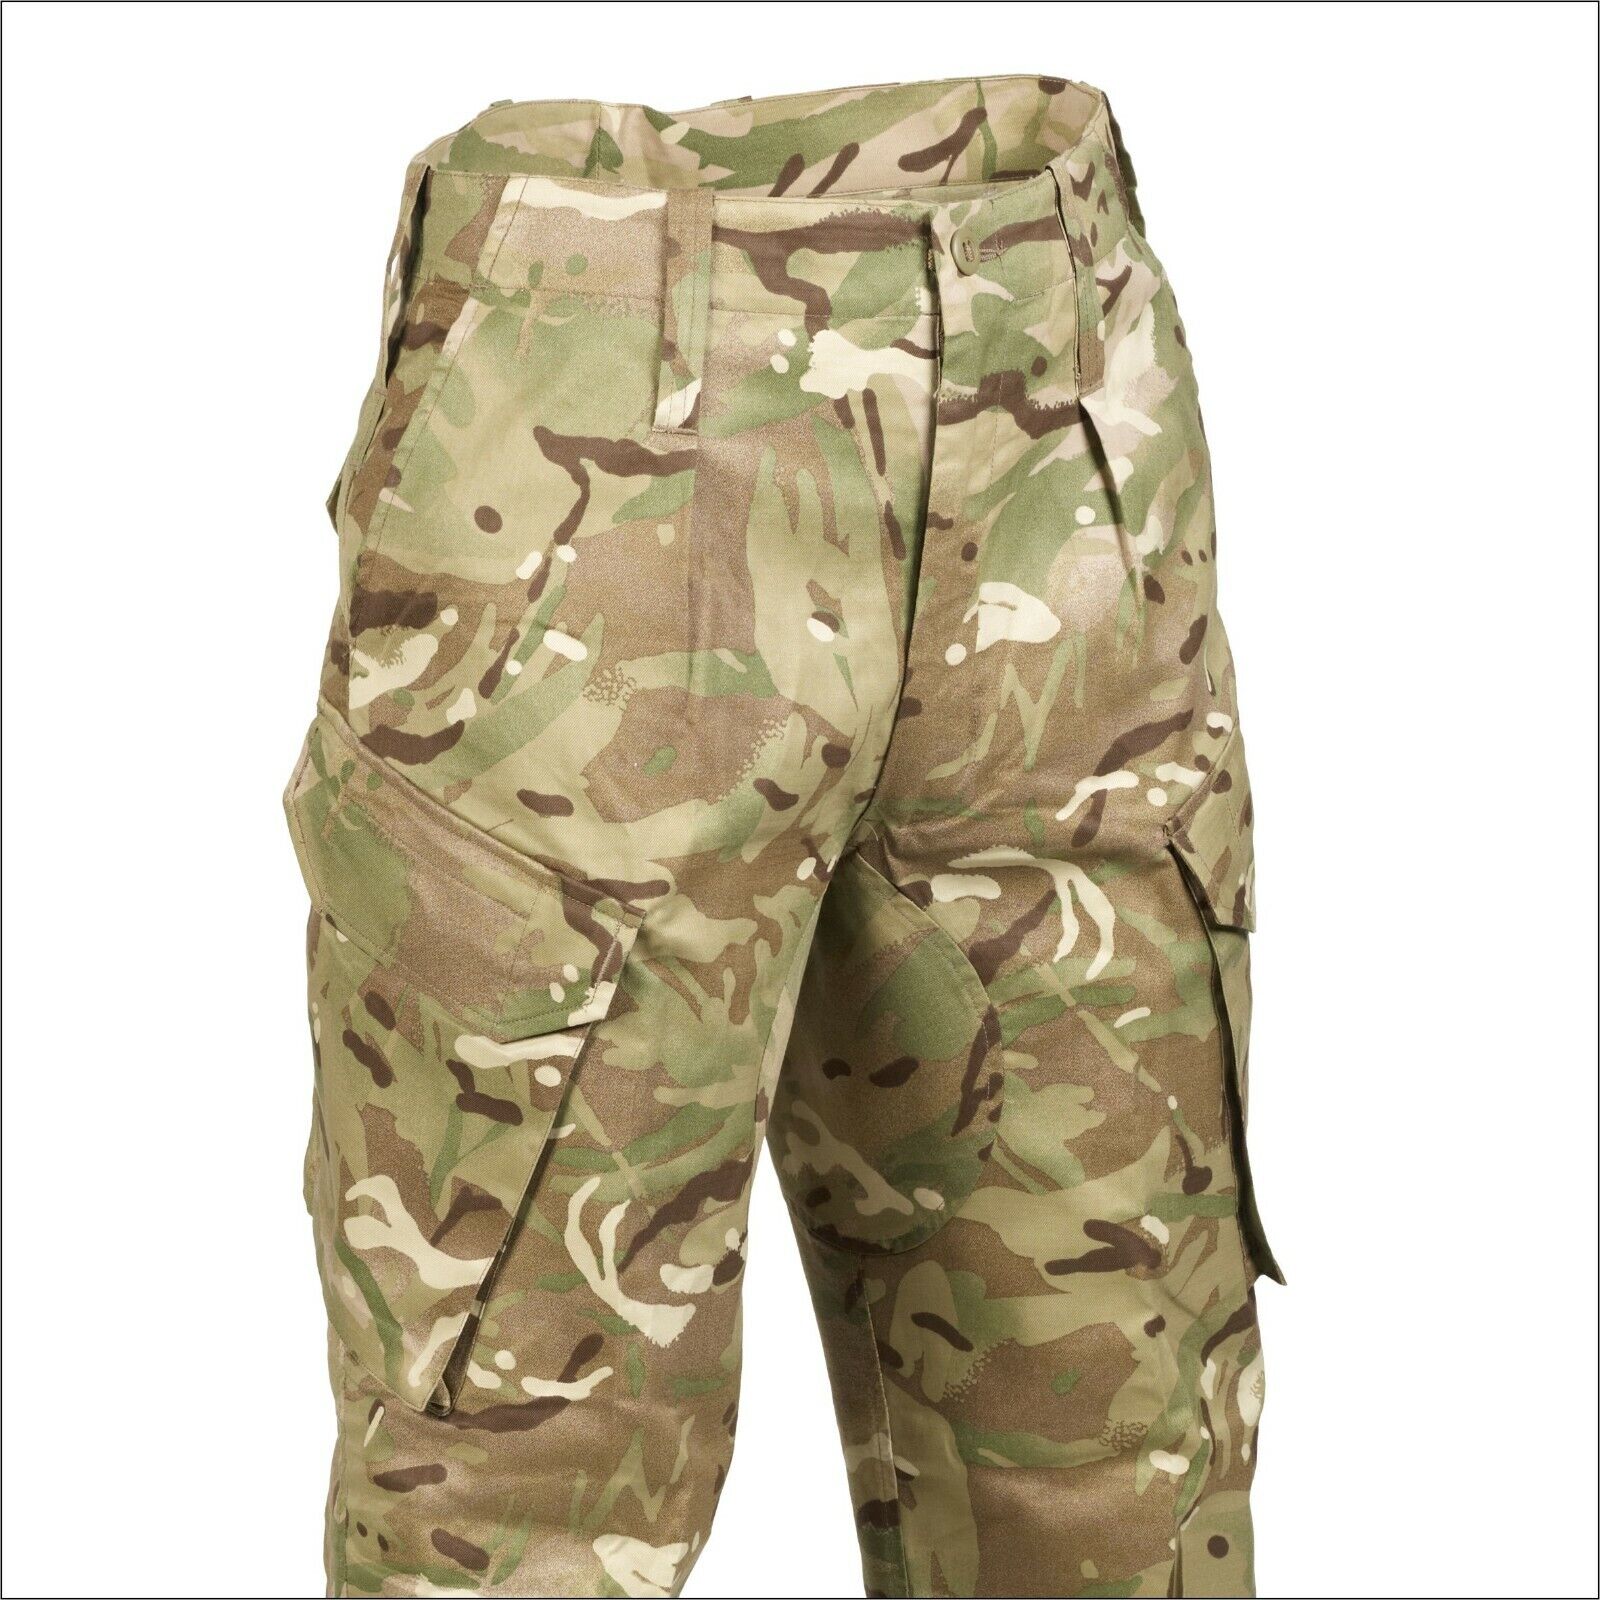 British Army Issue PCS Trousers MTP Combat Soldier Cadet-G1